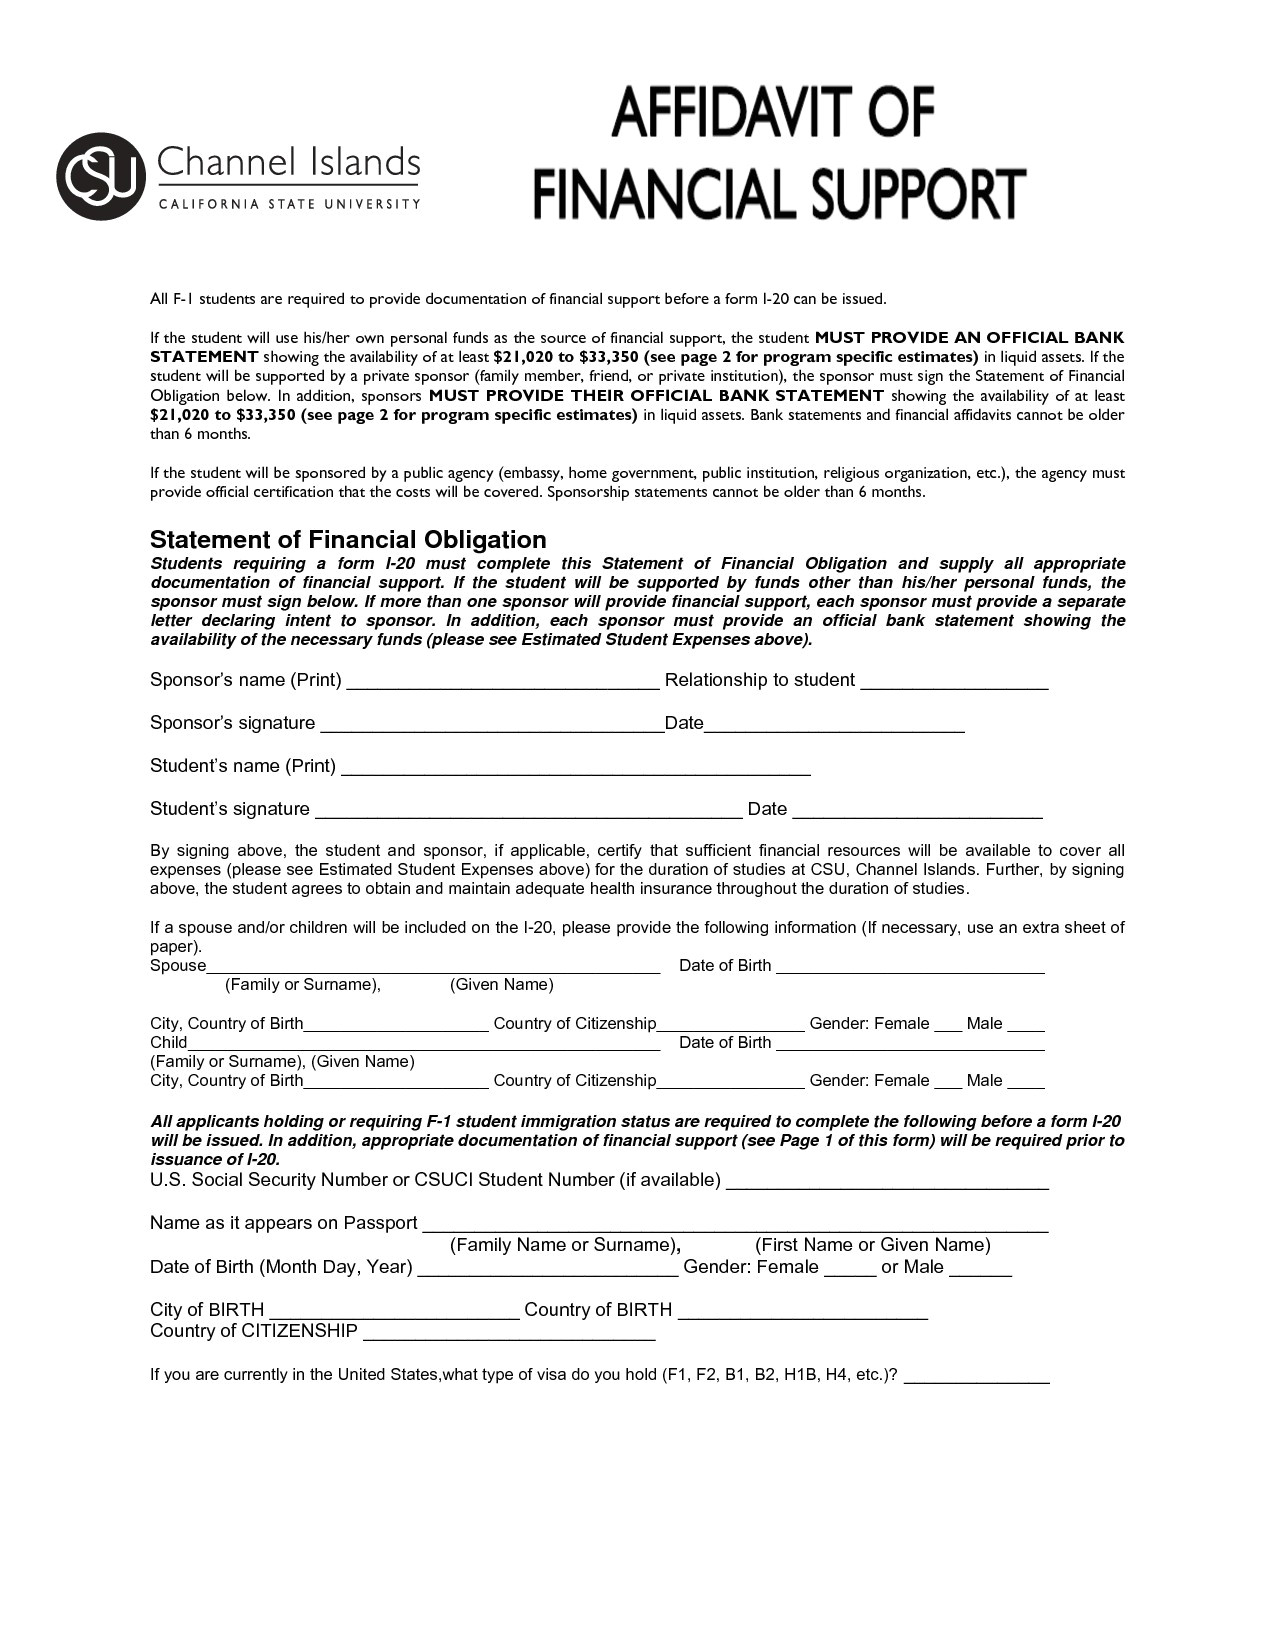 ppi claim letter template for credit card awesome search results affidavit of financial support letter affidavit